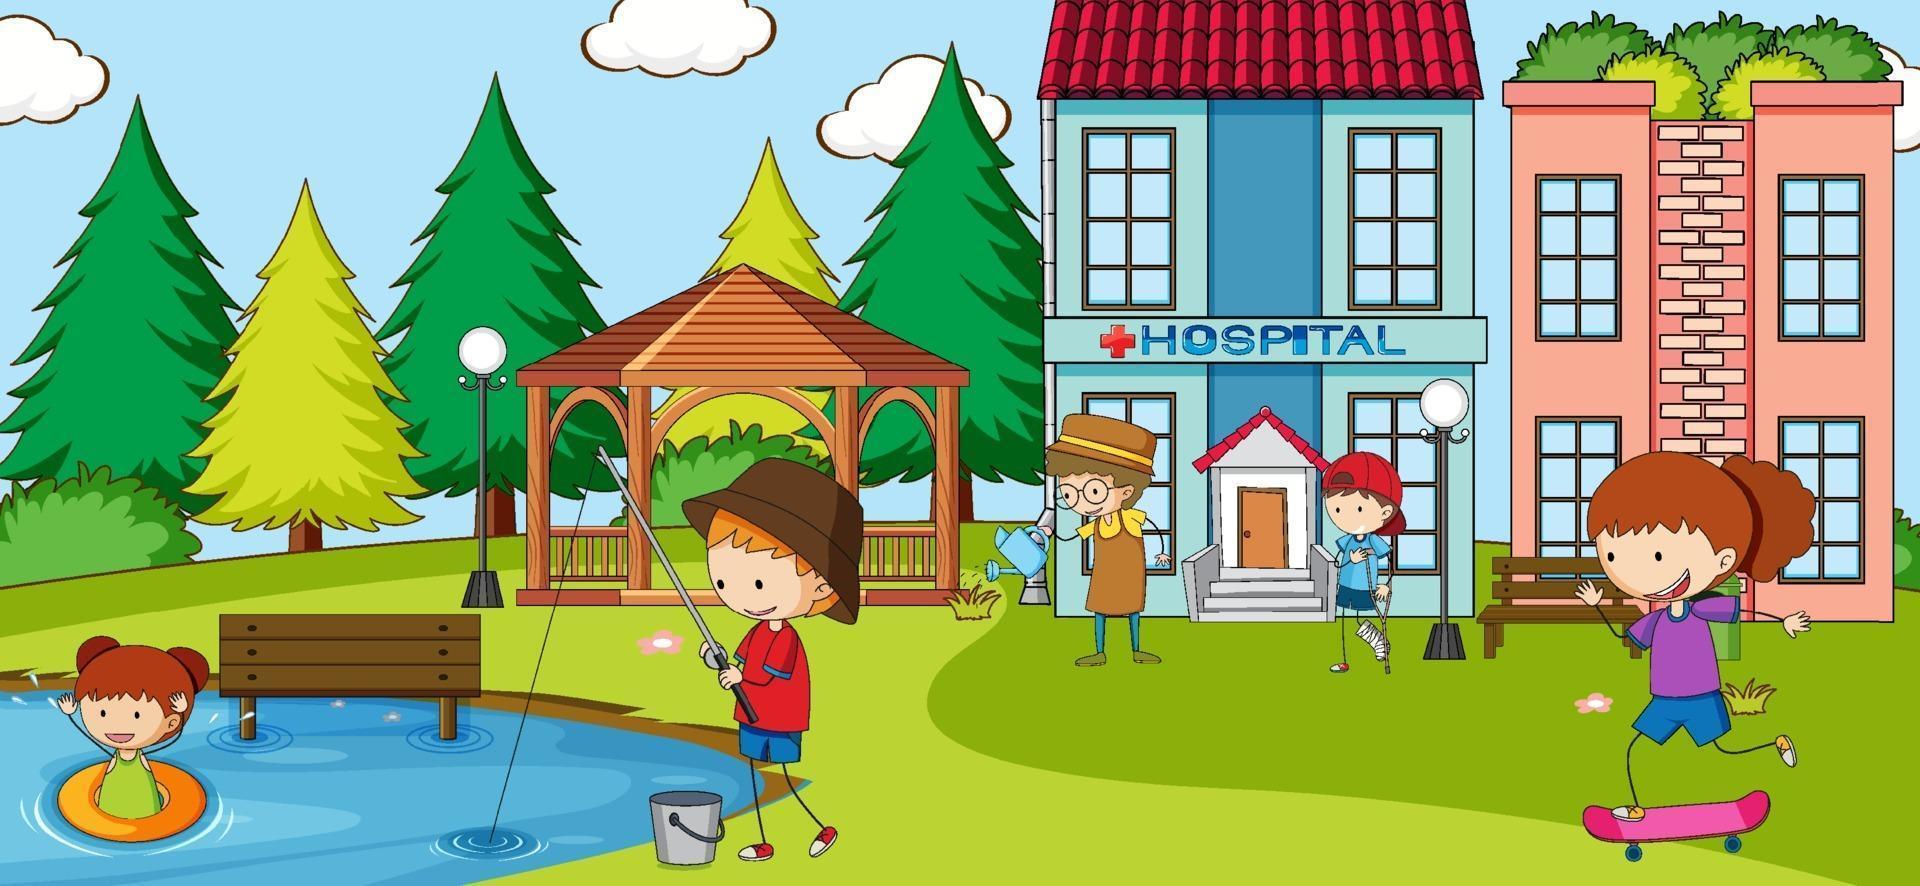 Outdoor scene with many kids playing in the park vector